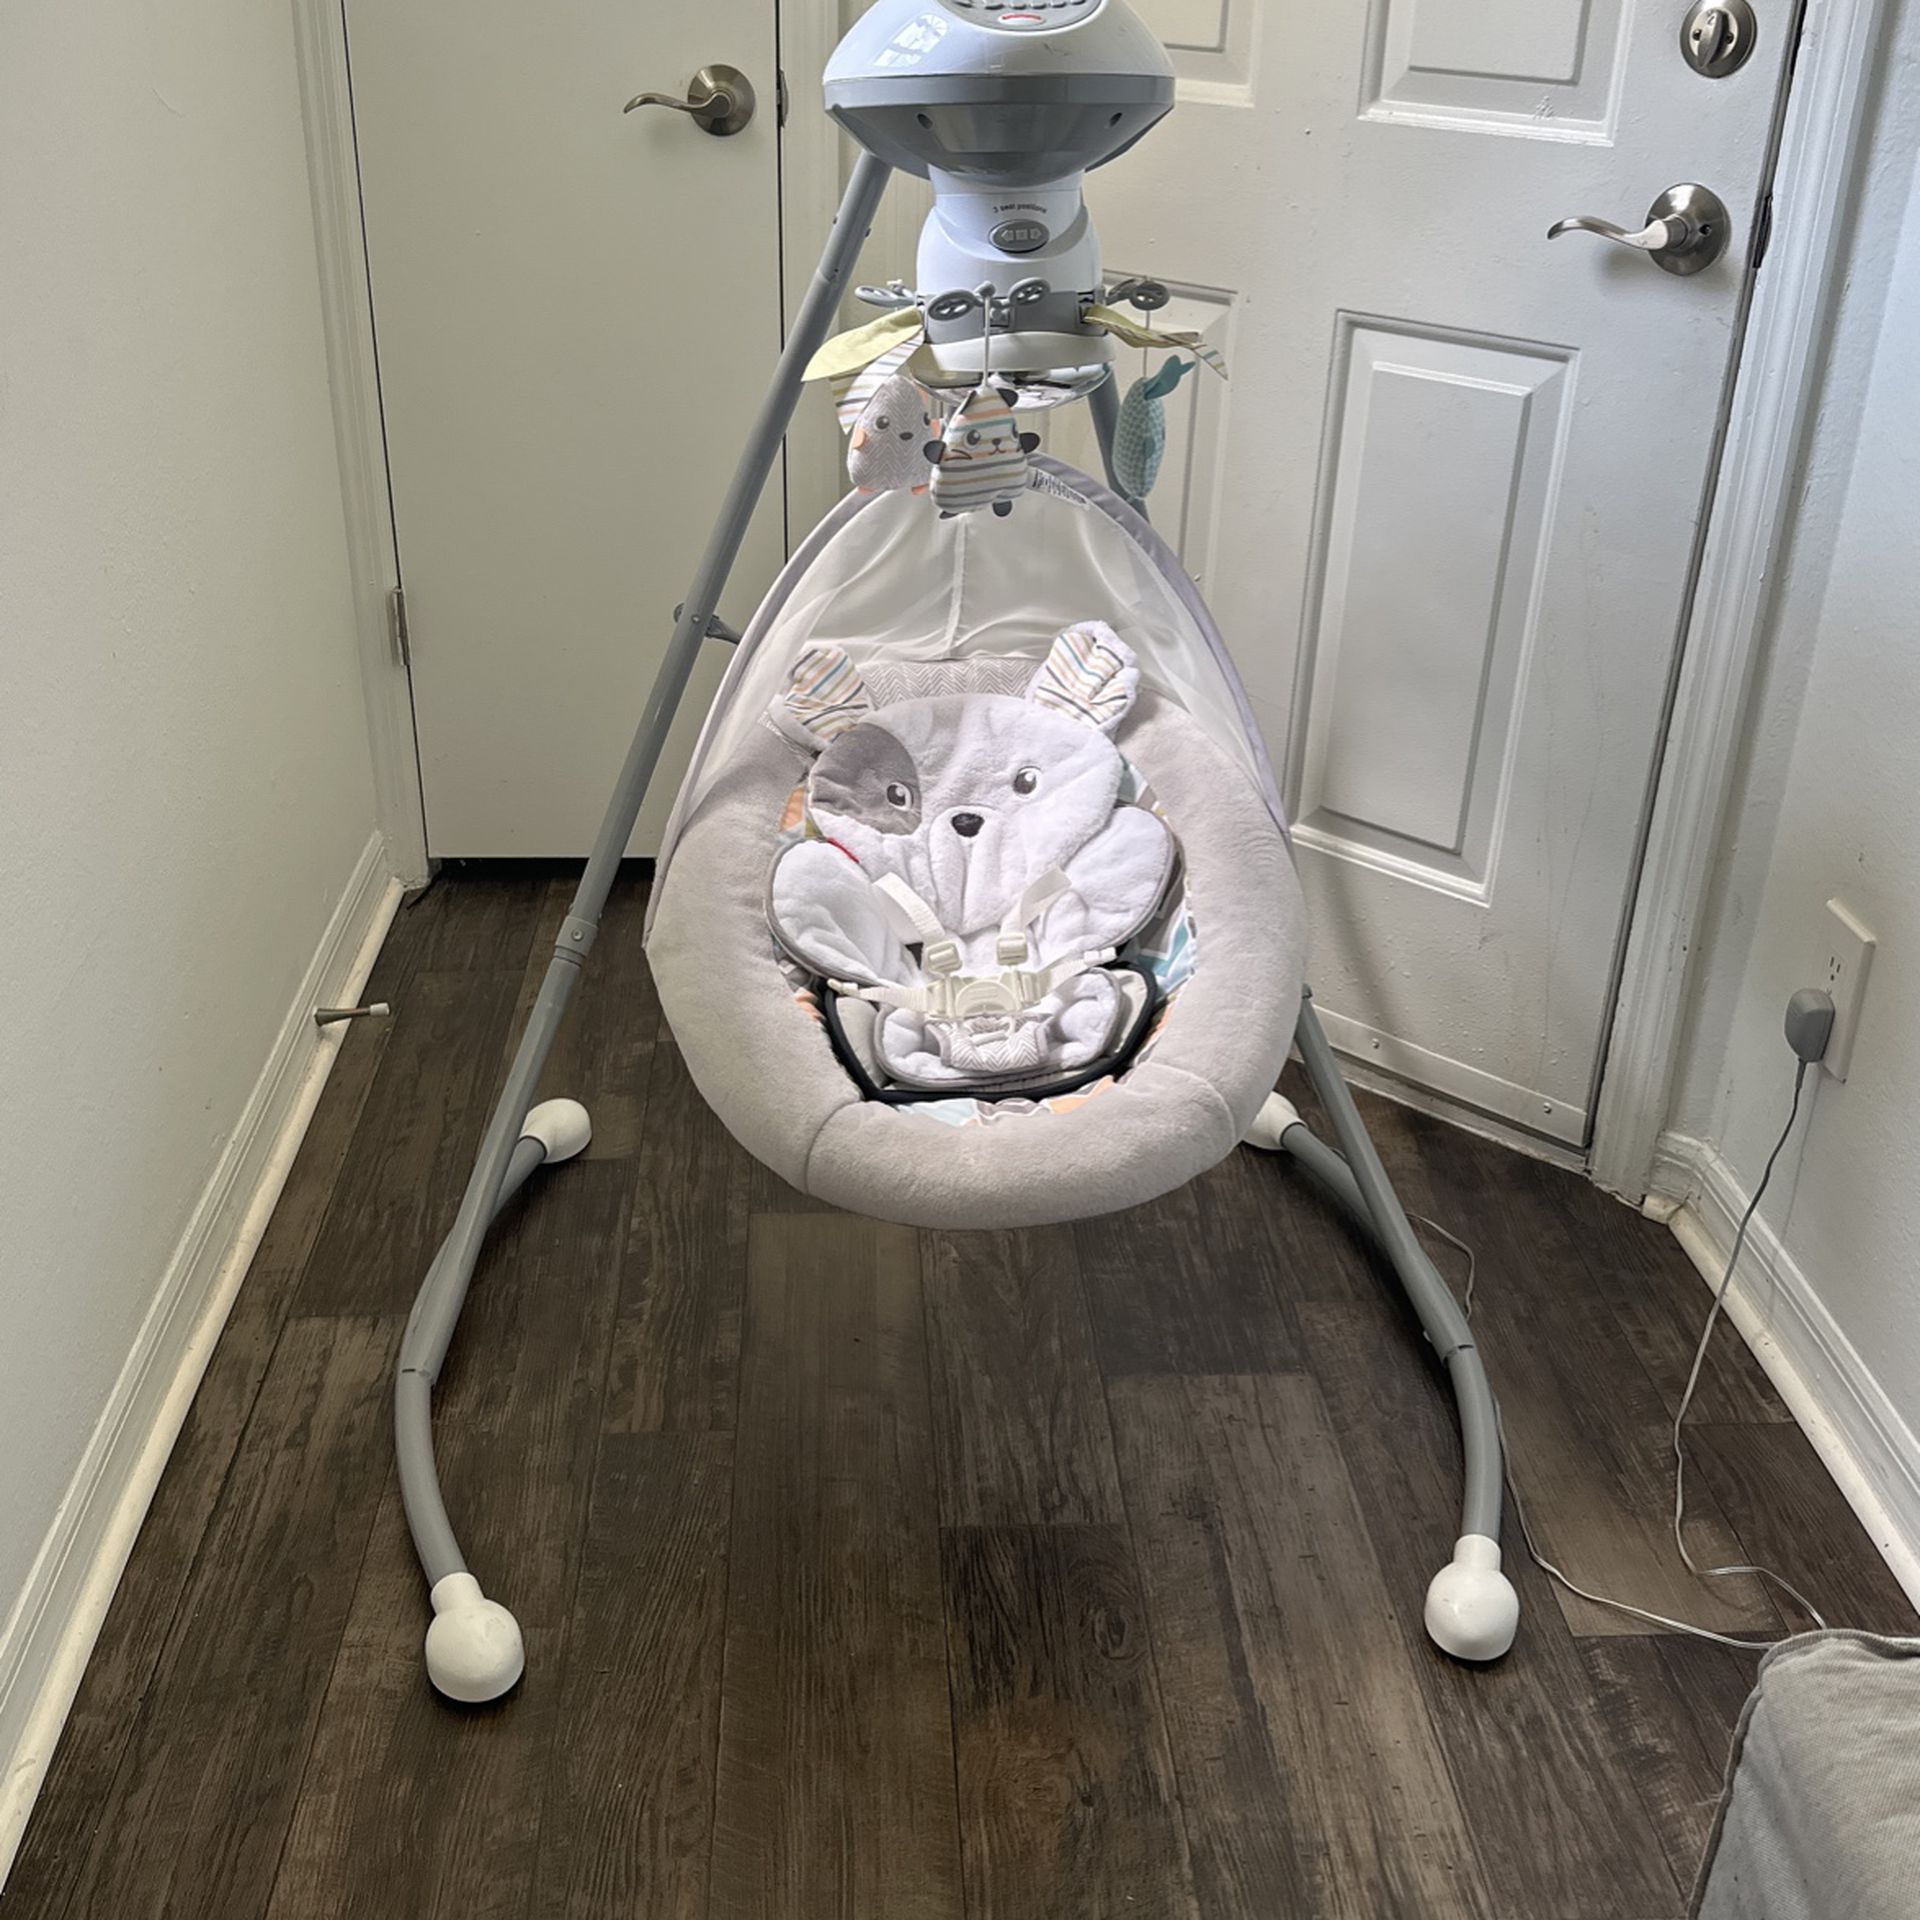 Fisher-Price Snow Leopard Baby Swing, Dual-Motion Newborn Seat with Music, Sounds, and Motorized Mobile